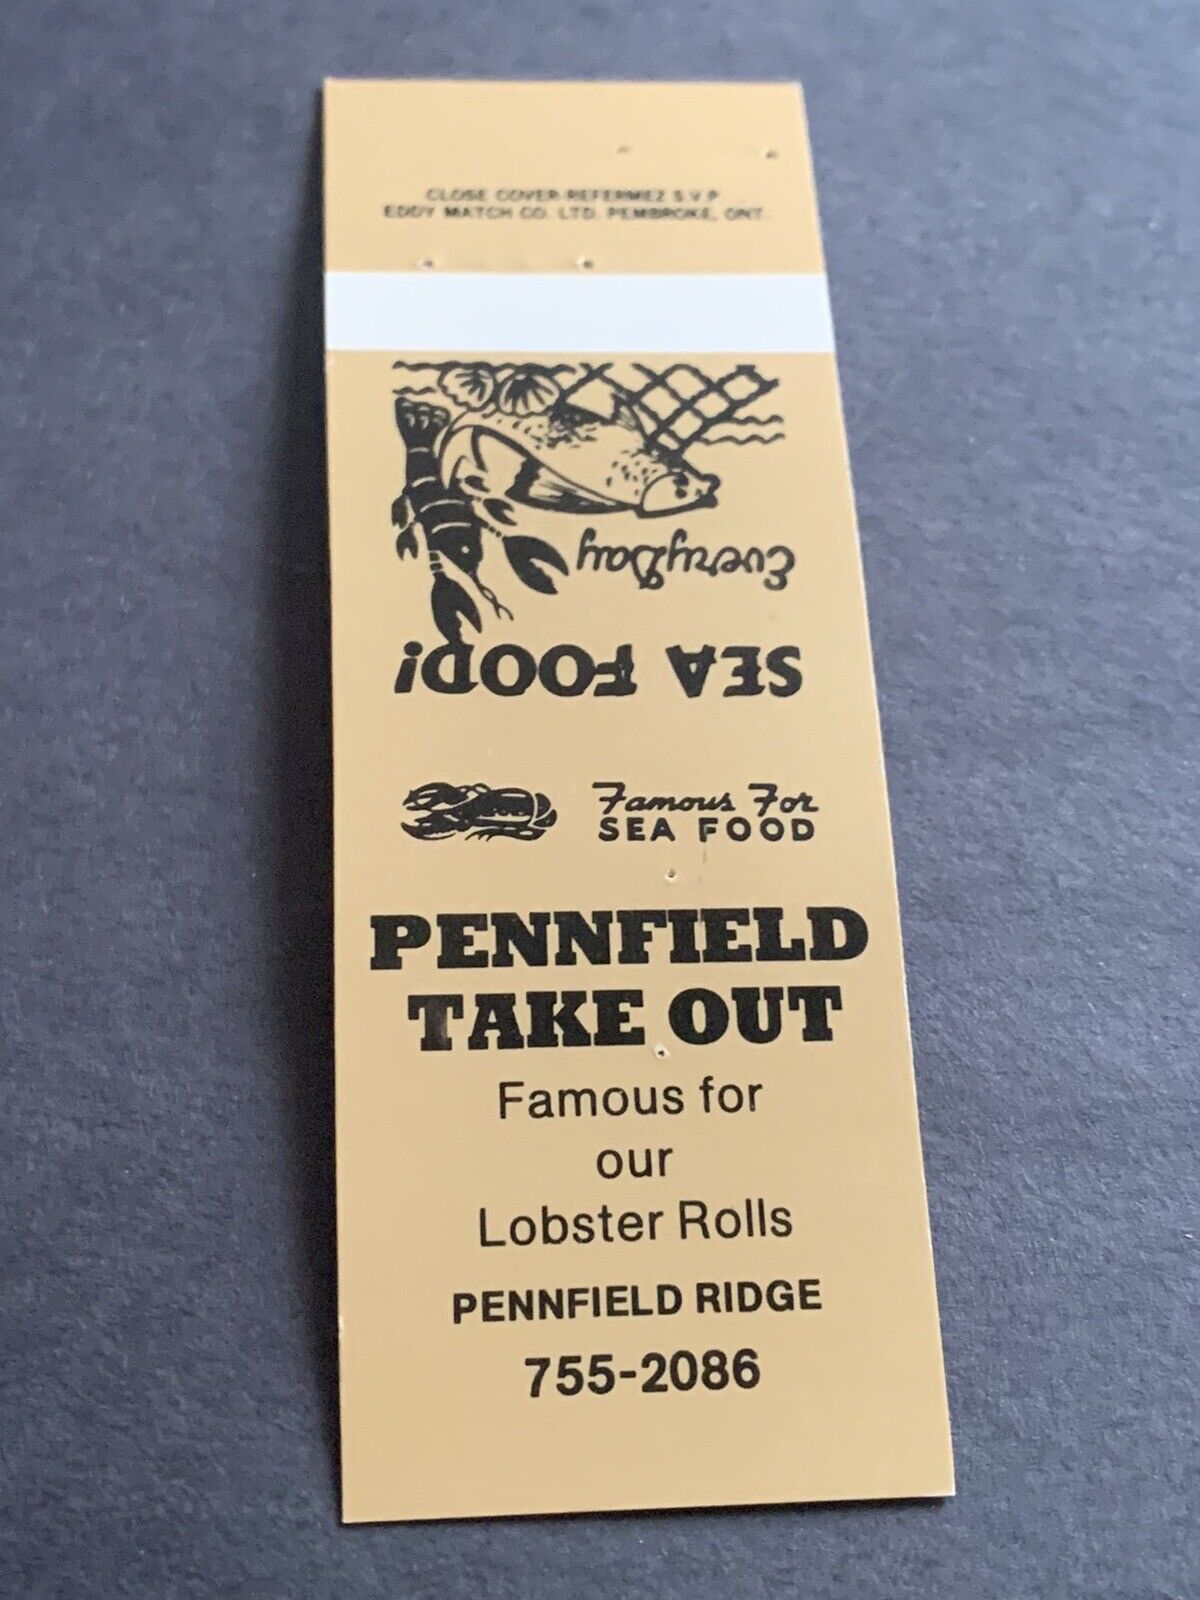 Vintage Canada Matchbook: “Pennfield Take Out” Pennfield Ridge